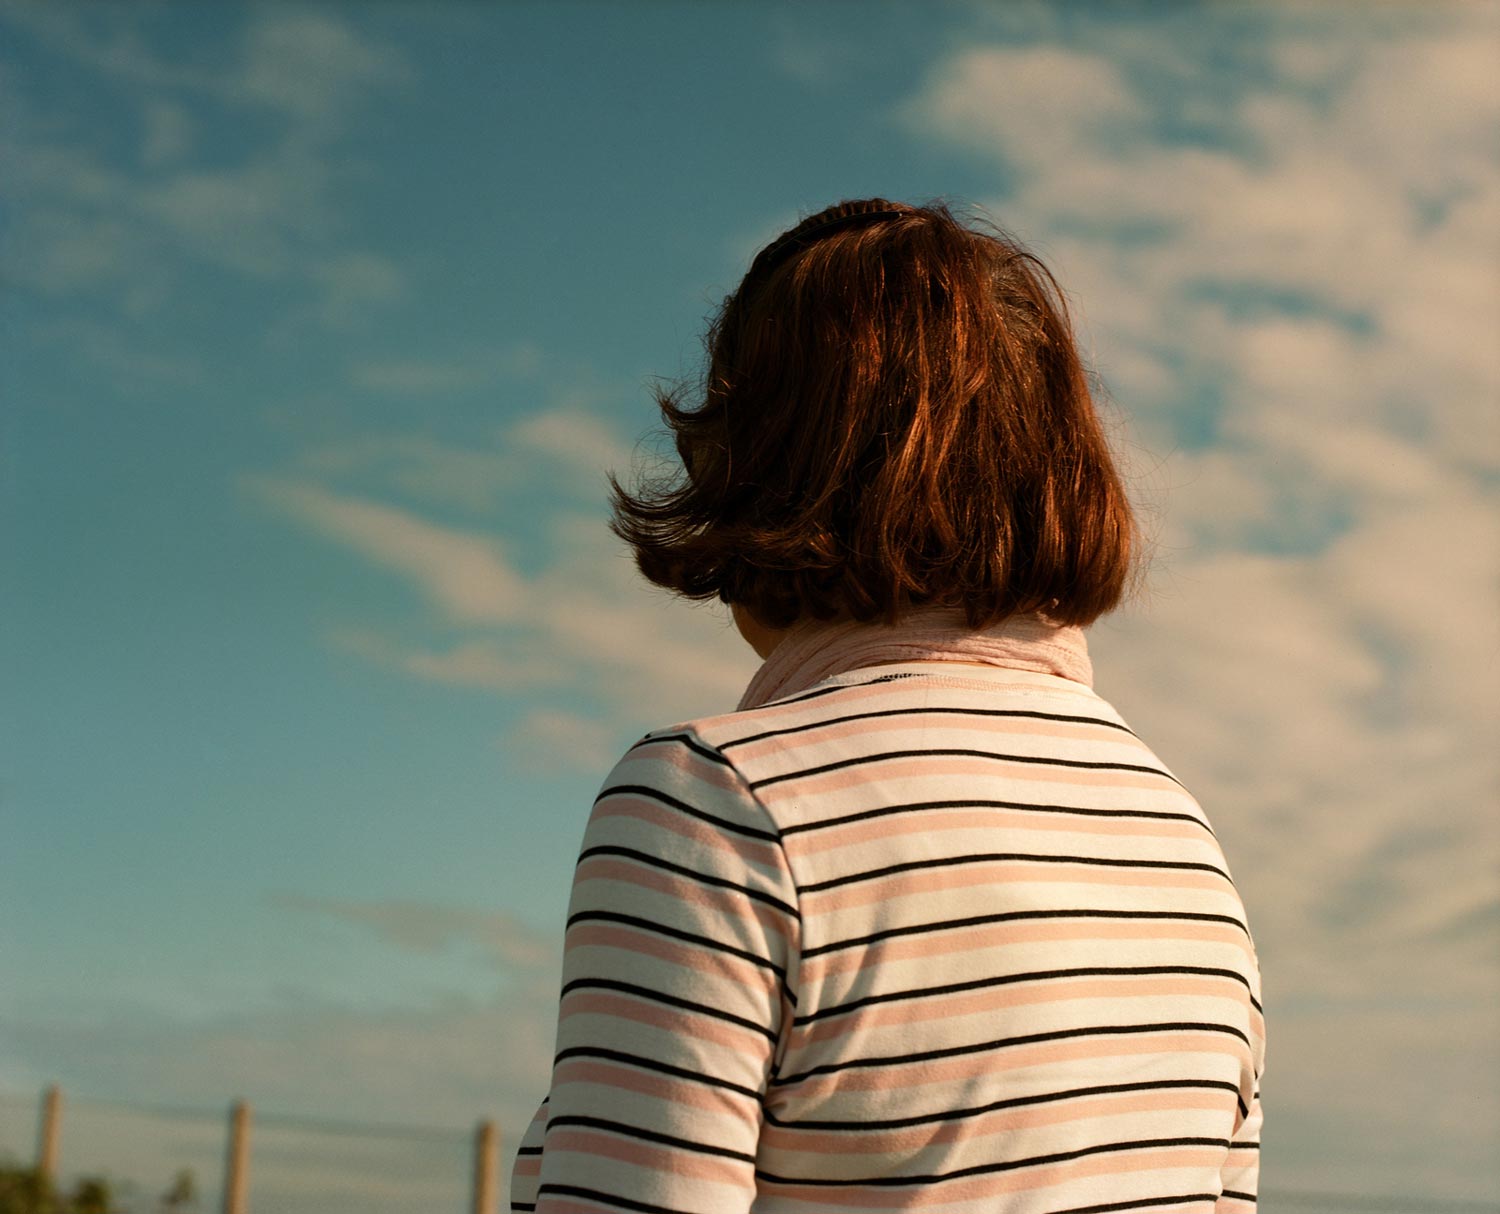 red haired woman from behind, looking at the clouds, analogue photography.